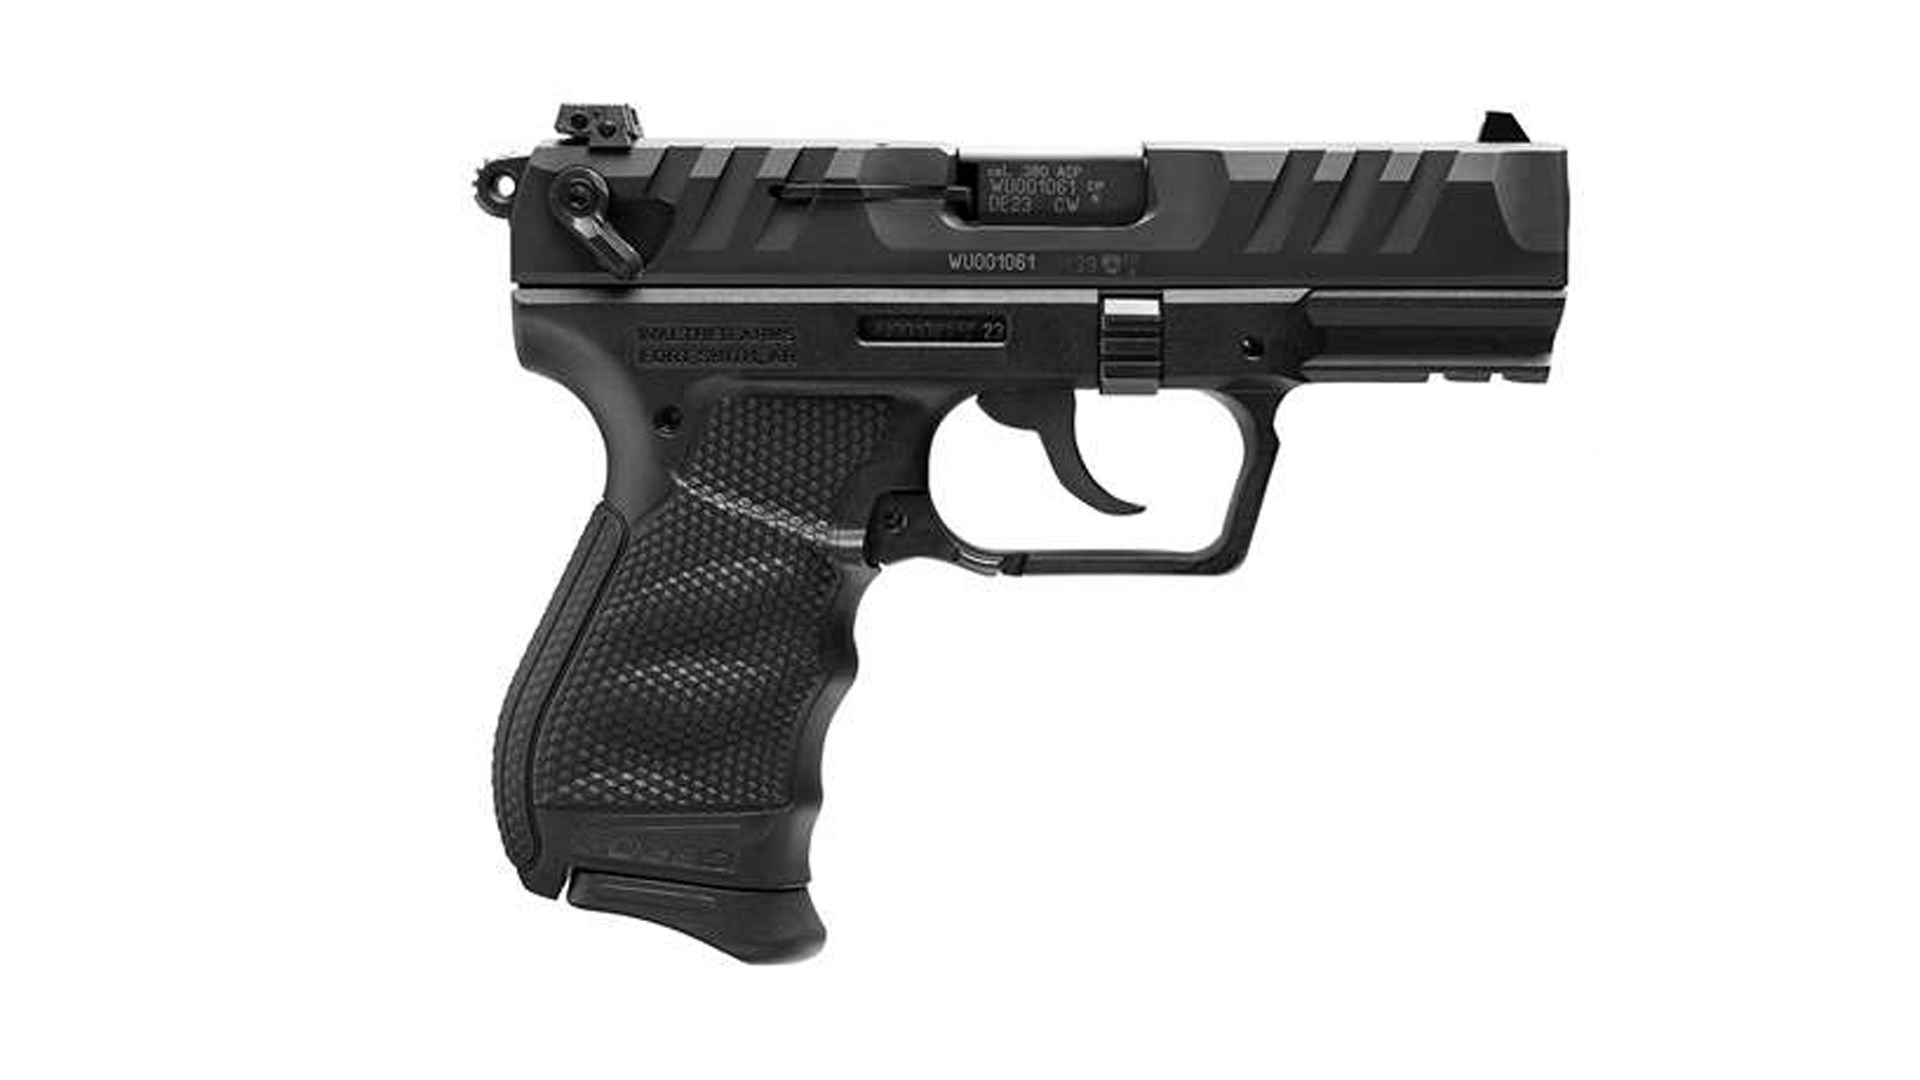 Right side of the all-black Walther PD380 pistol.